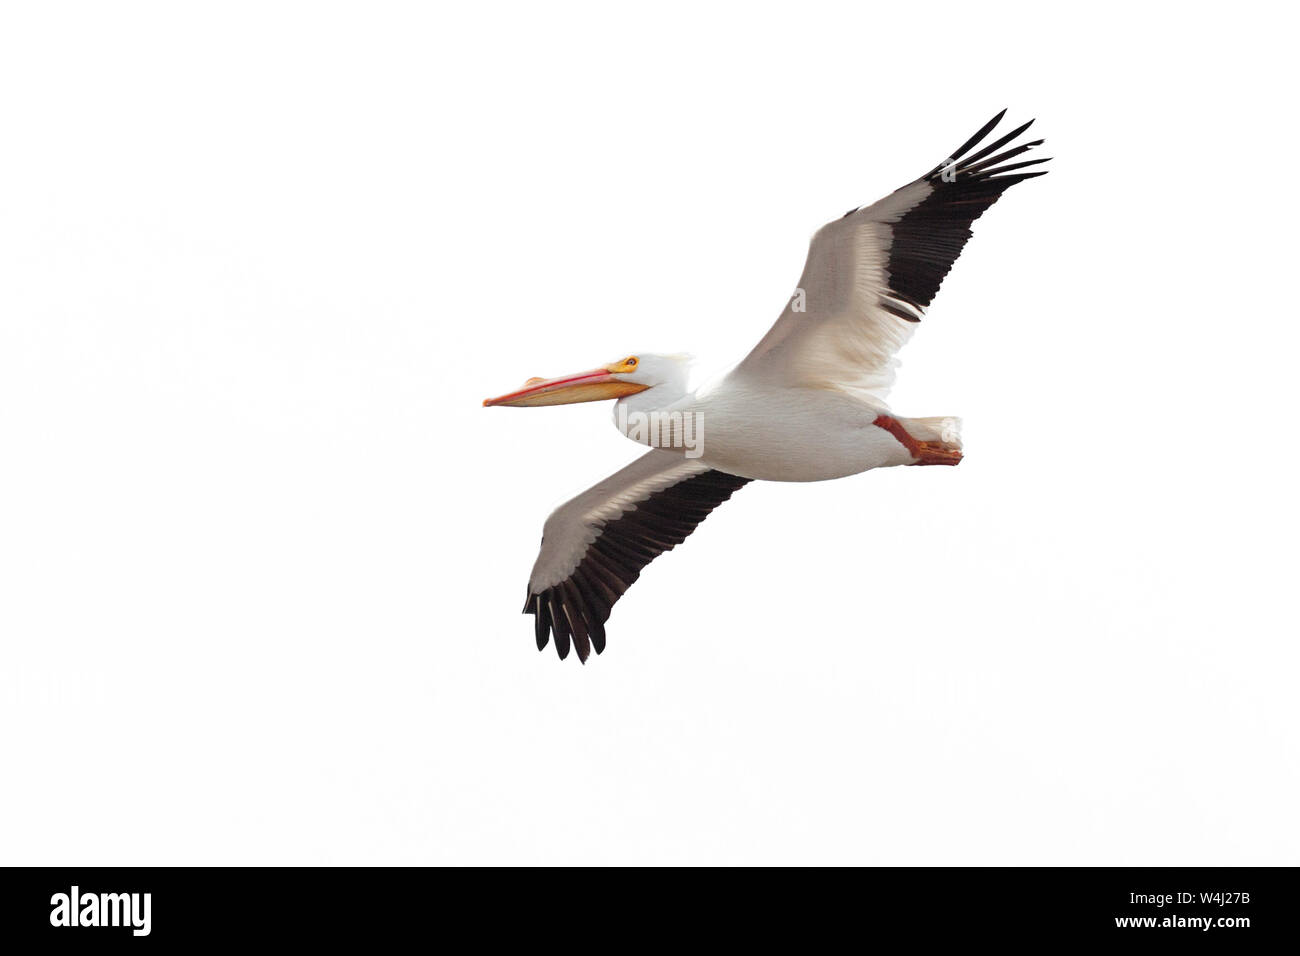 Wings spread wide open, an American white pelican drifts across a white background Stock Photo